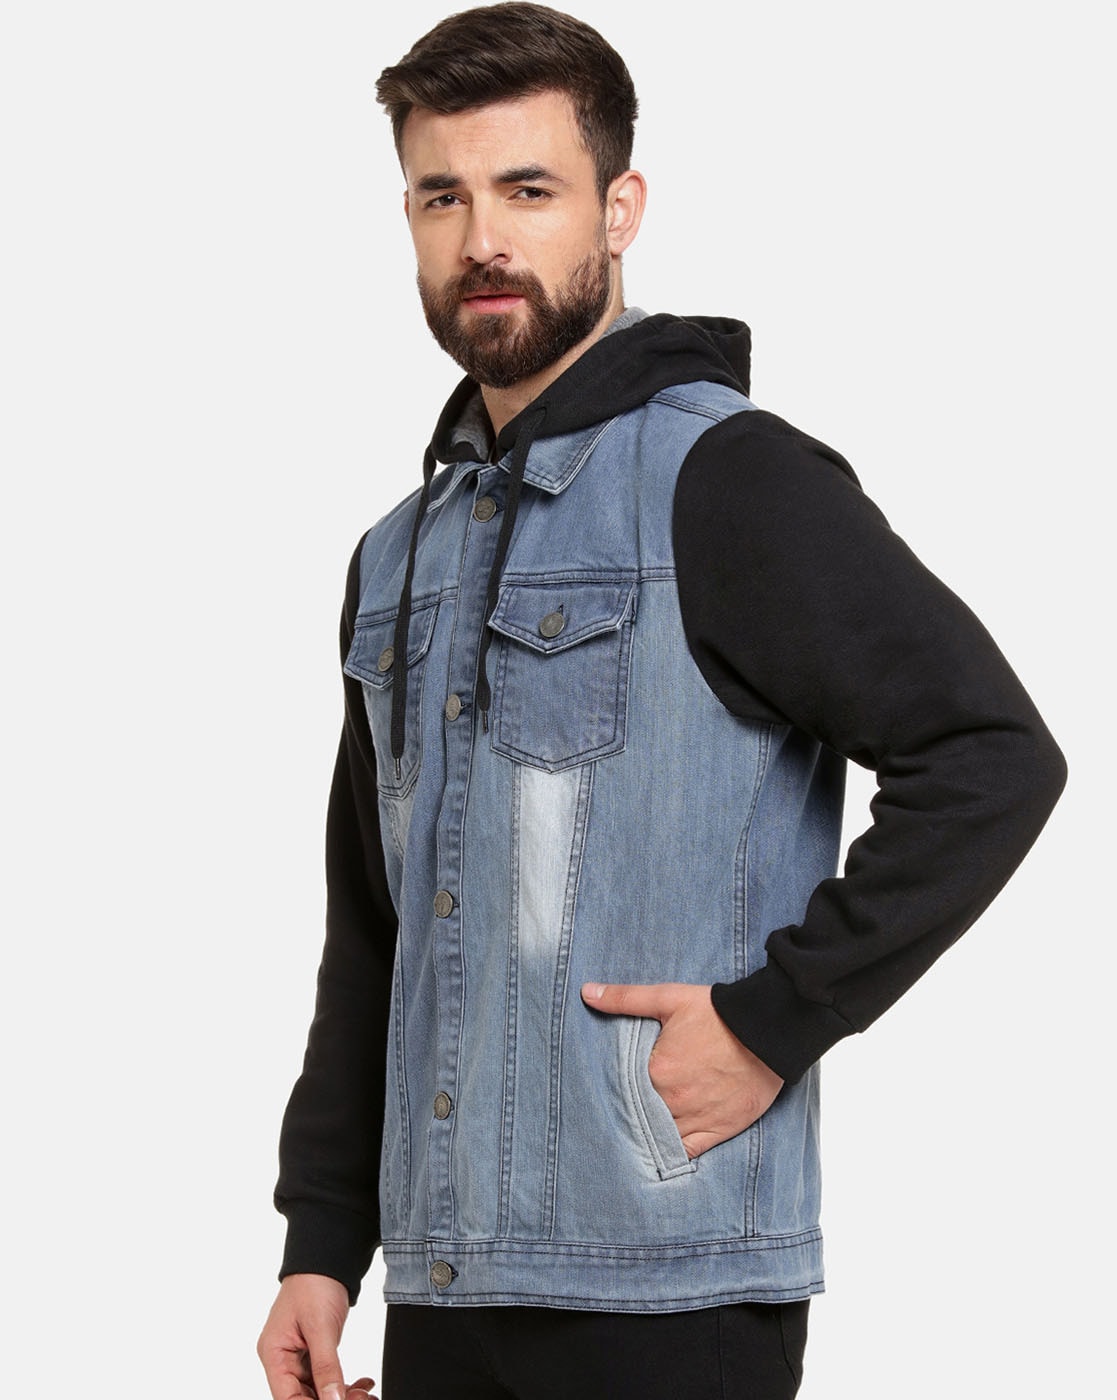 Wholesale Campus Sutra Men's Light-Washed Blue & Black Regular Fit Denim  Jacket For Winter Wear | Hooded Collar | Full Sleeve | Buttoned | Casual Denim  Jacket For Man | Western Stylish